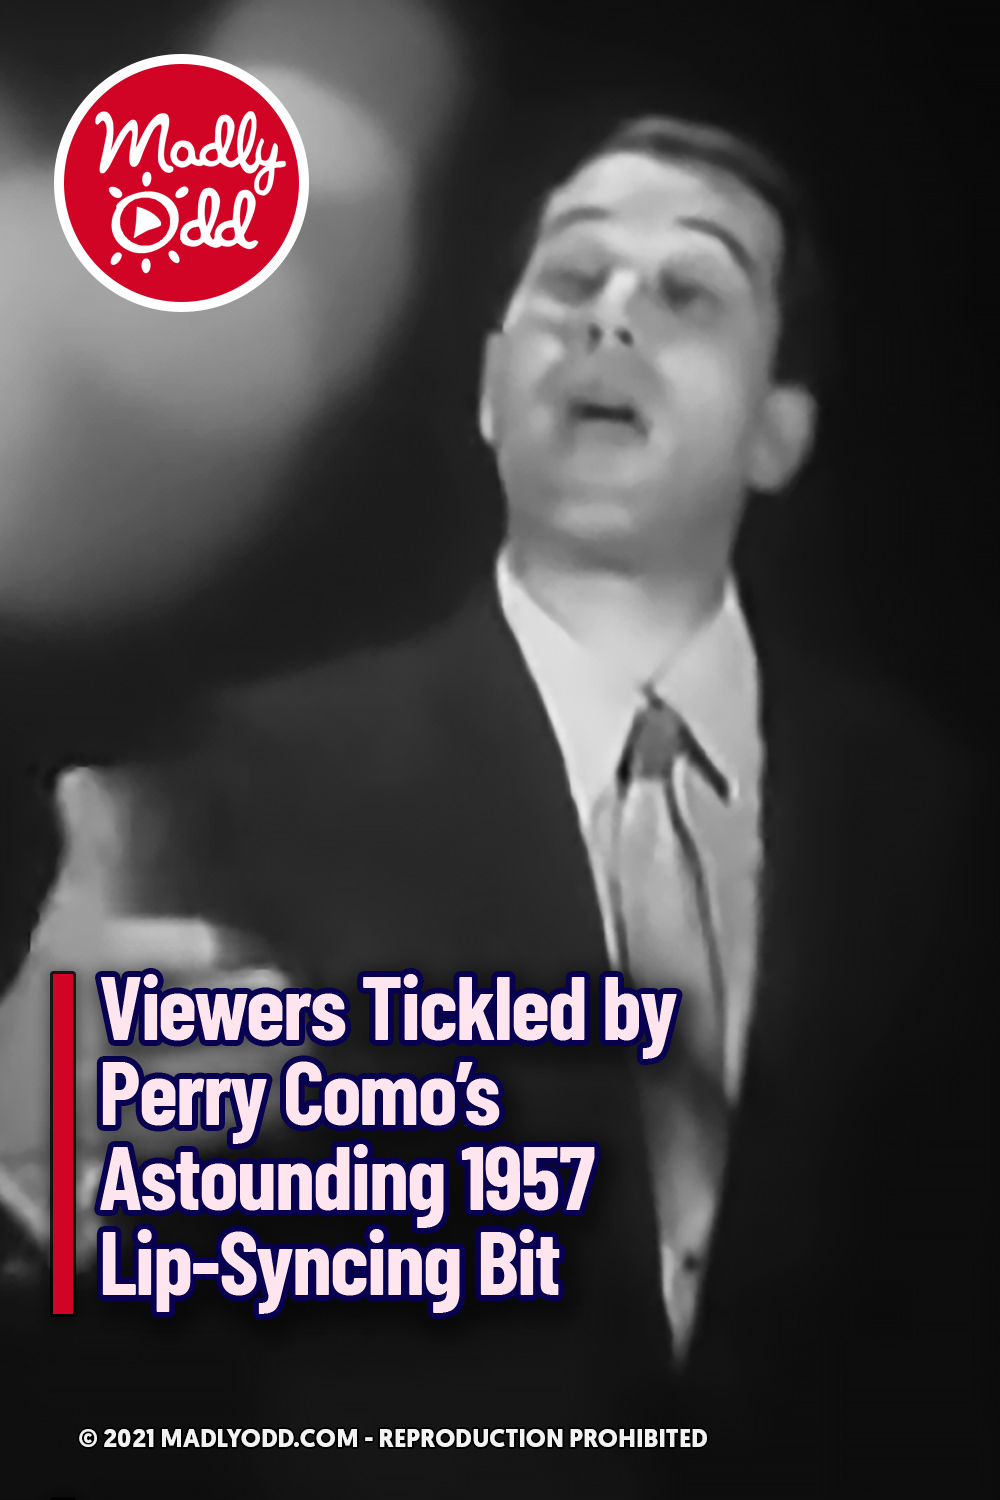 Viewers Tickled by Perry Como’s Astounding 1957 Lip-Syncing Bit